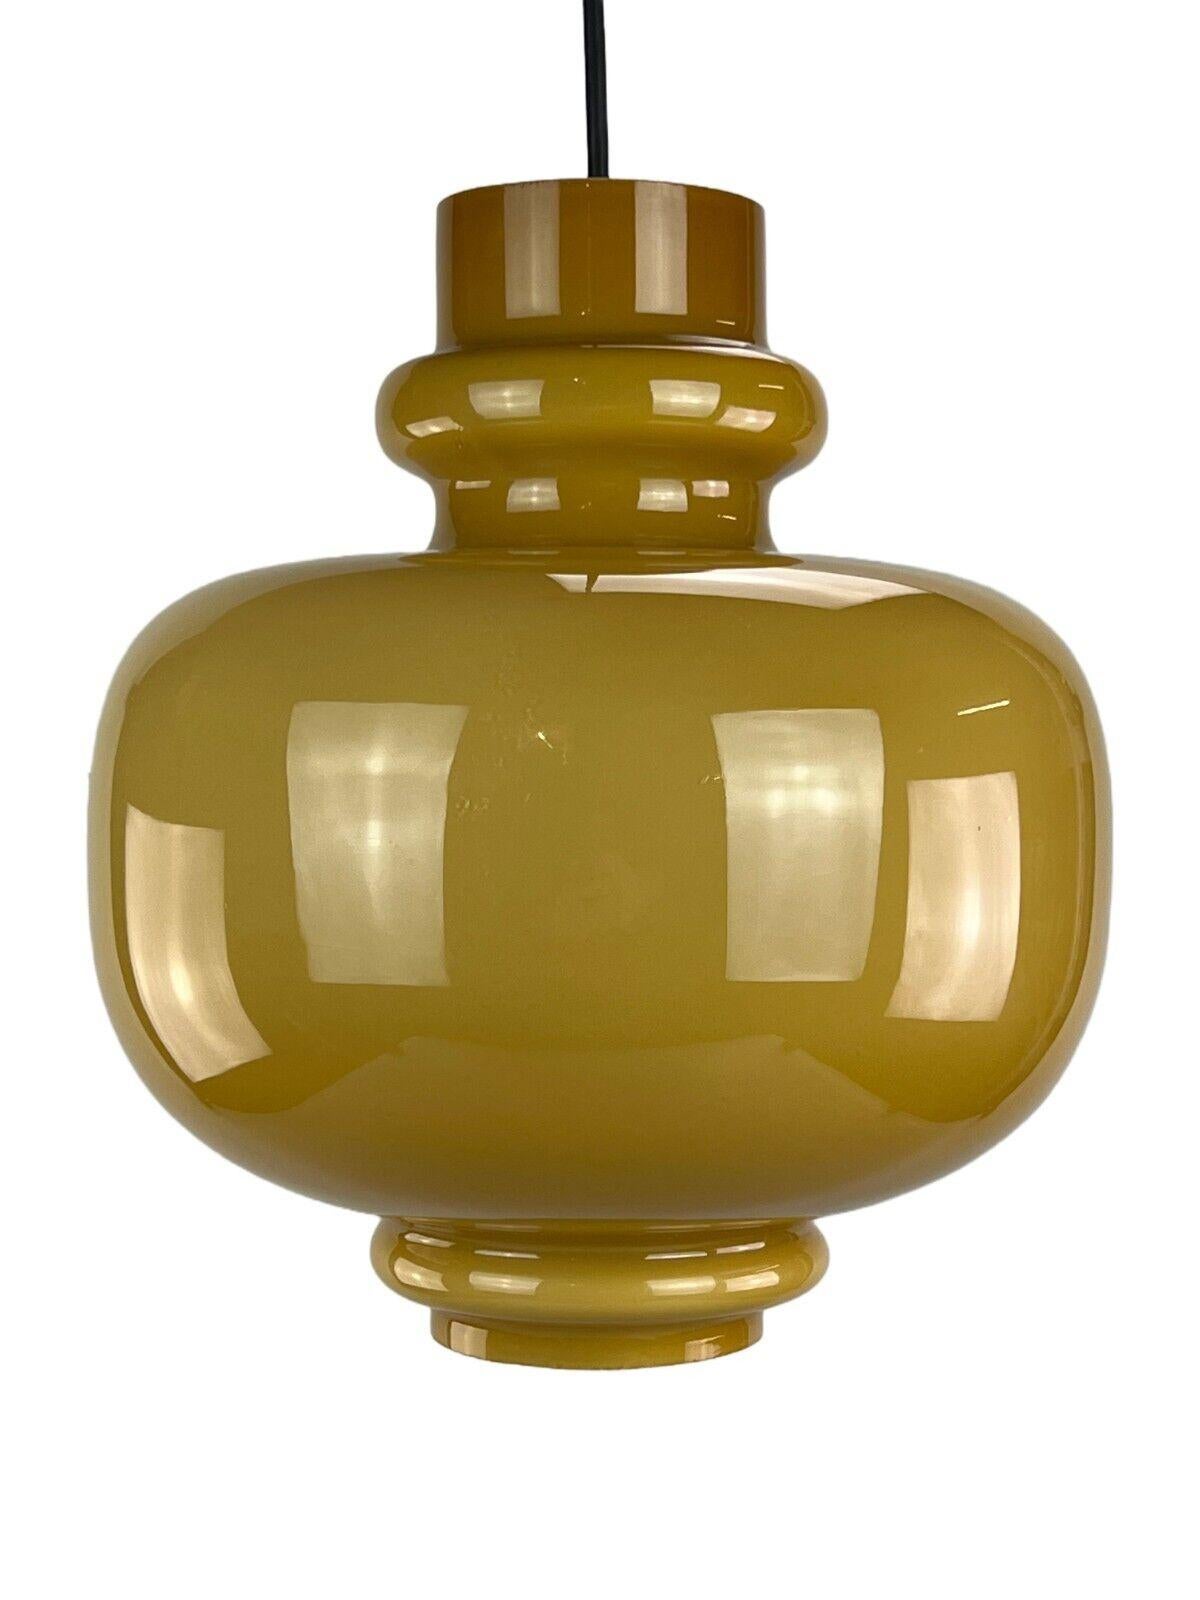 60s 70s lamp light hanging lamp Hans Agne Jakobsson for Staff mustard yellow

Object: ceiling lamp

Manufacturer: Staff

Condition: good

Age: around 1960-1970

Dimensions:

Diameter = 28.5cm
Height = 31.5cm

Other notes:

E27